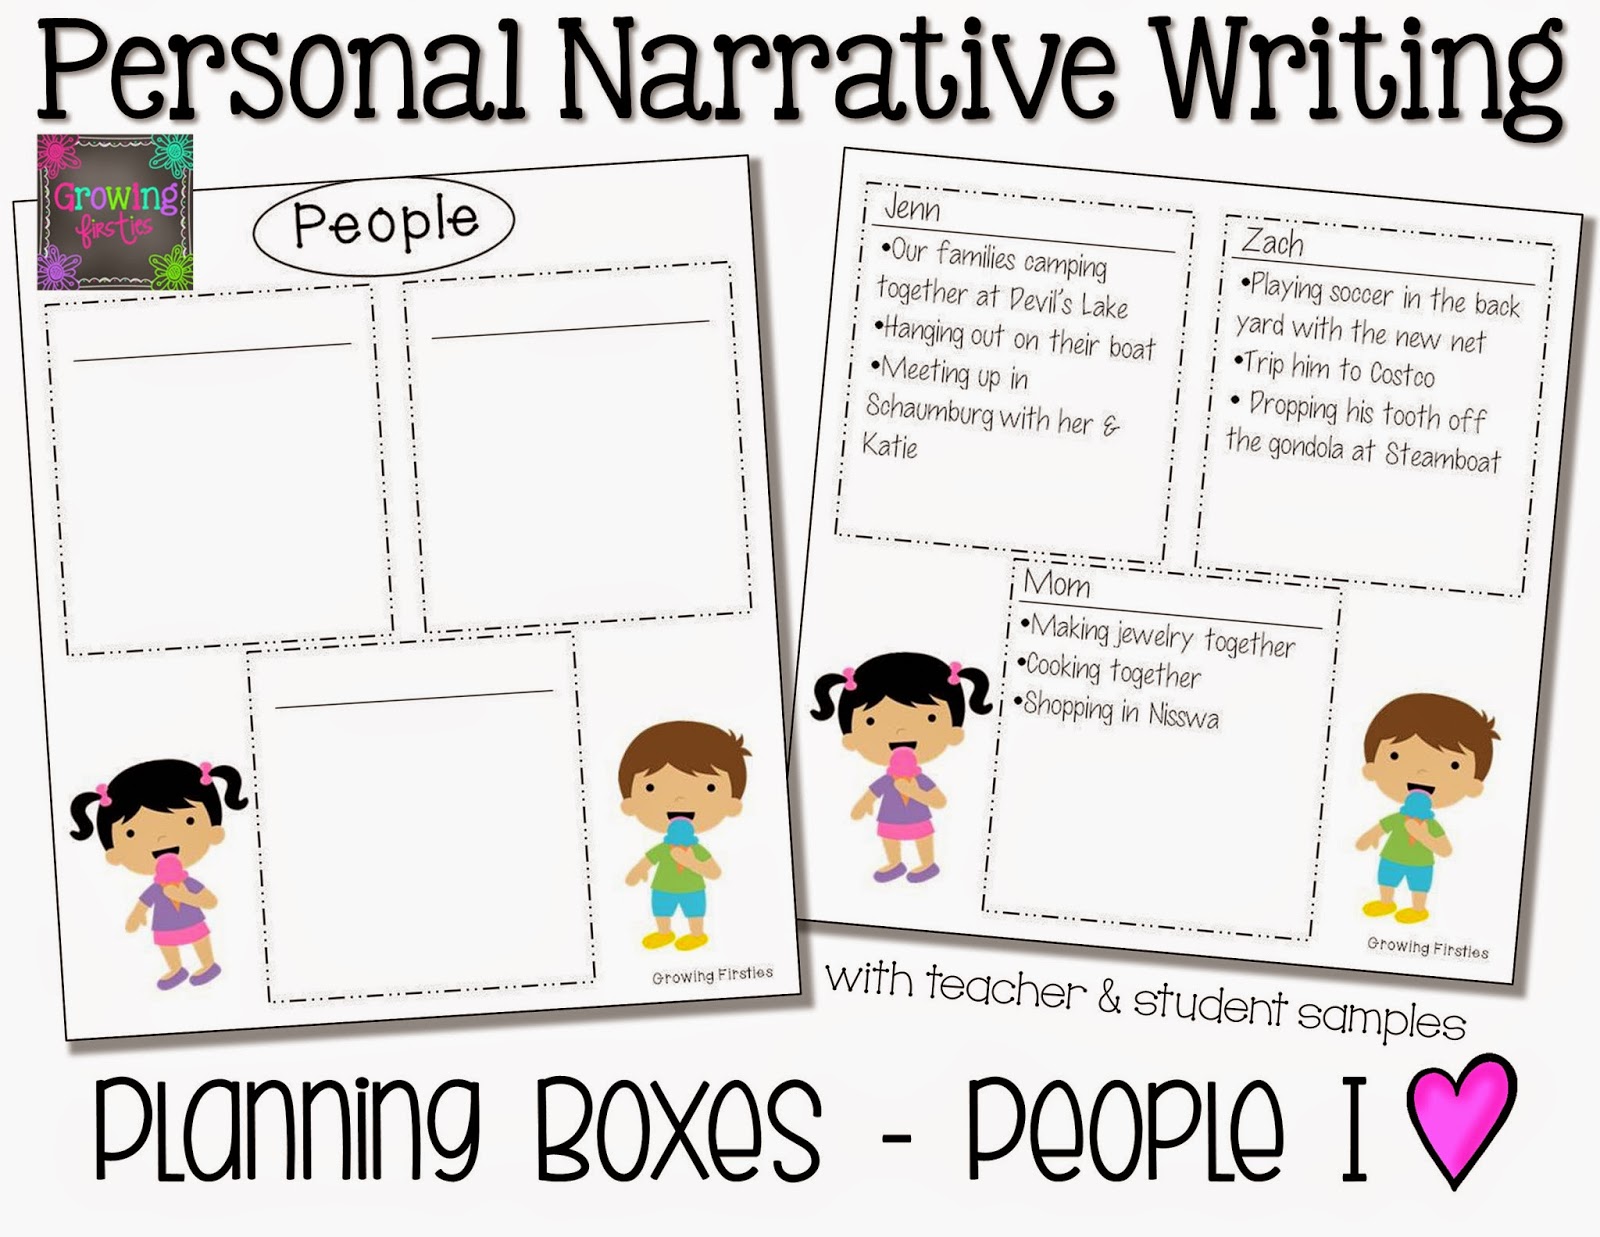 published personal narrative essays for kids